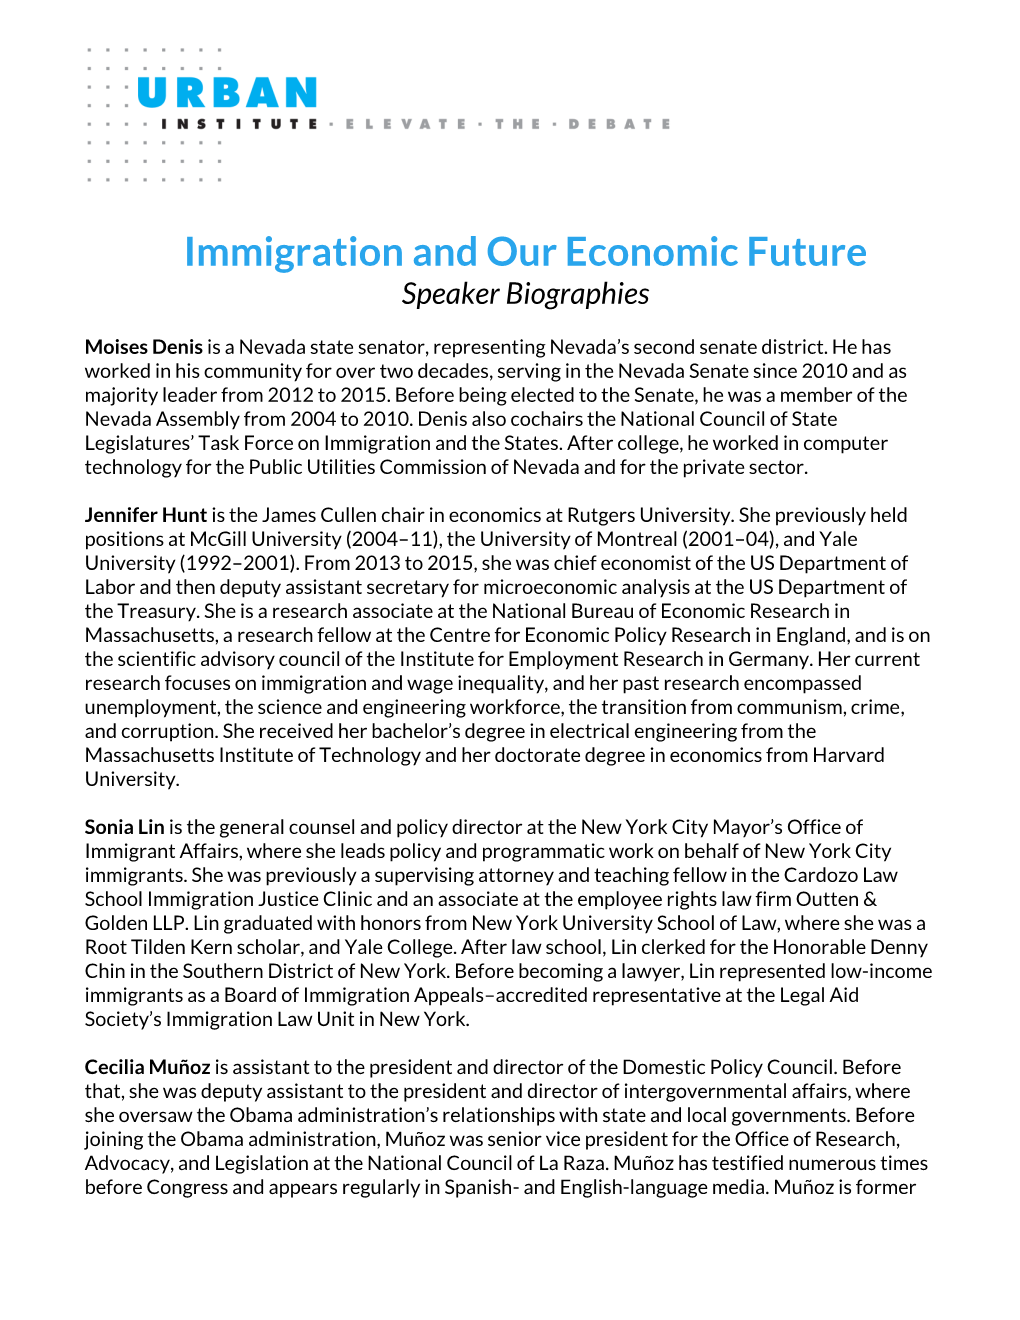 Immigration and Our Economic Future Speaker Biographies